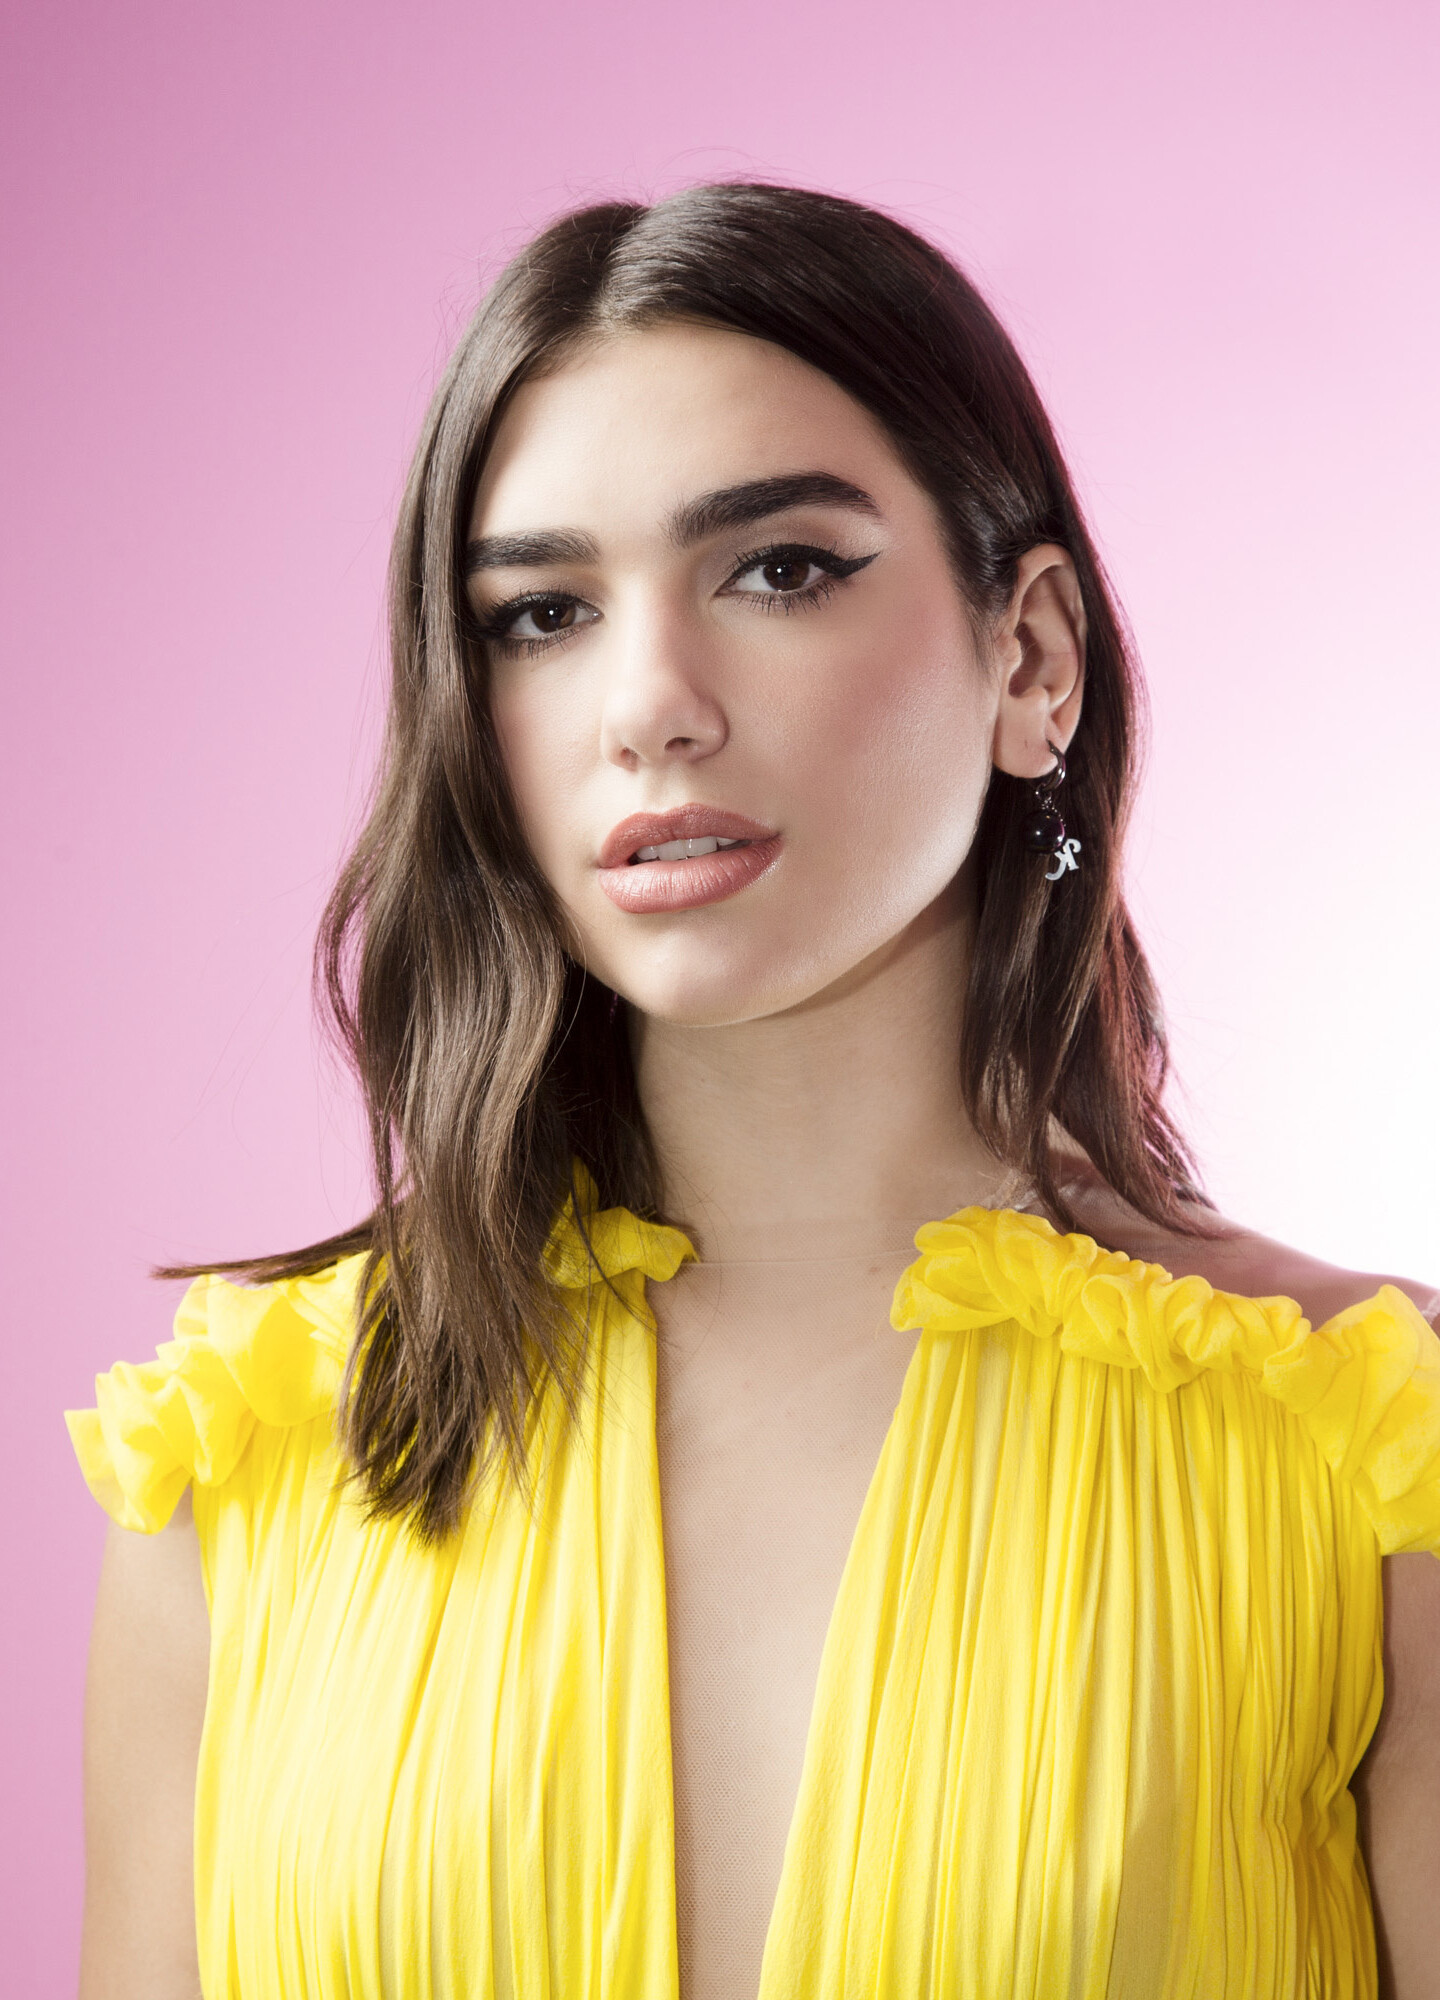 Dua Lipa: "Future Nostalgia" was released for digital download and streaming on 13 December 2019. 1440x2000 HD Wallpaper.